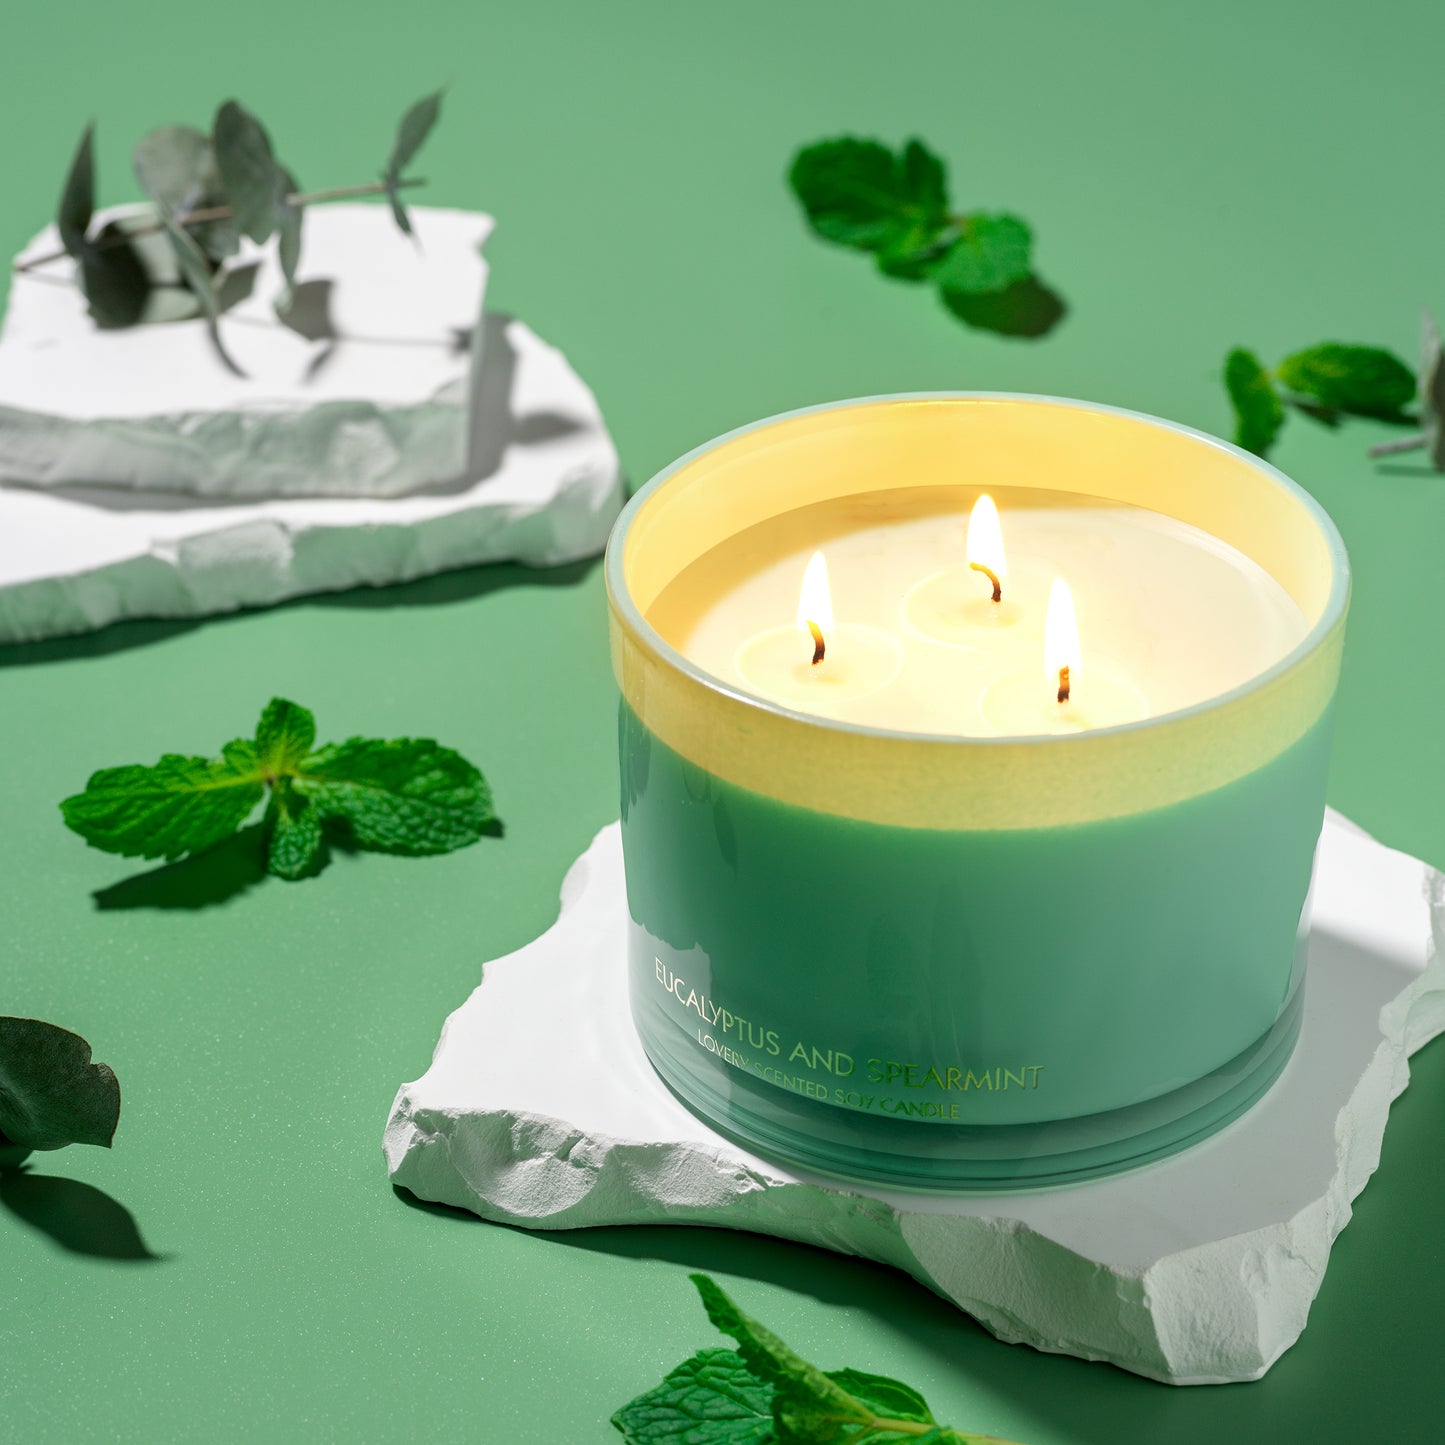 Eucalyptus Spearmint 3 Wick Candle Set - 13oz Soy Wax Home Candle with Wick Trimmer